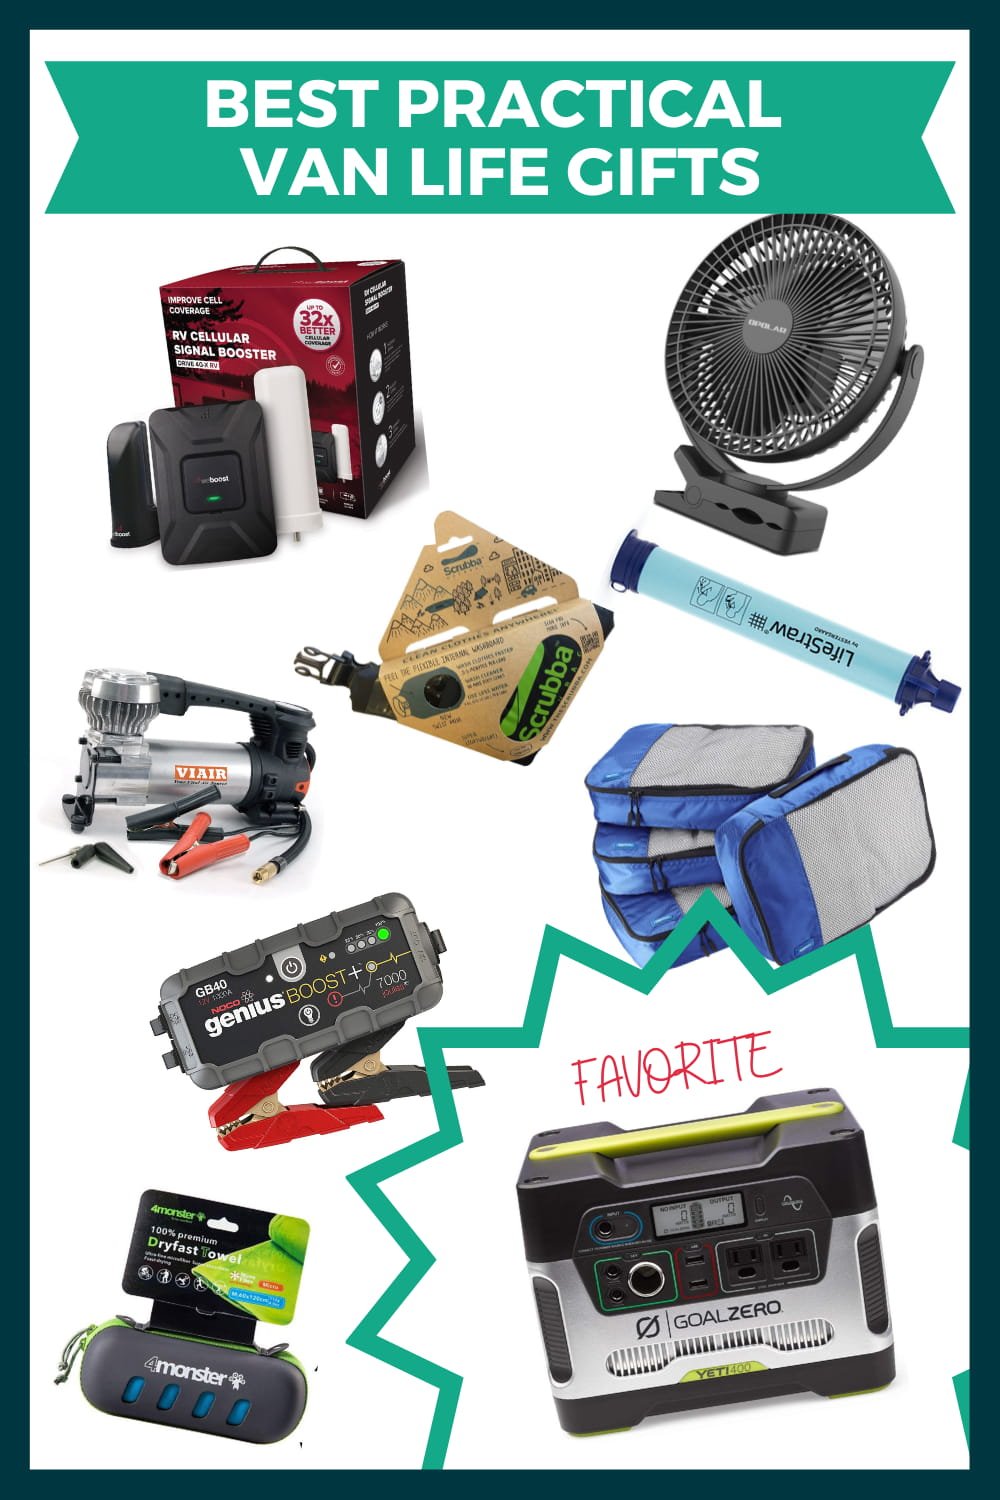 Top 20 Gadget Gifts for the Avid RV Camper 